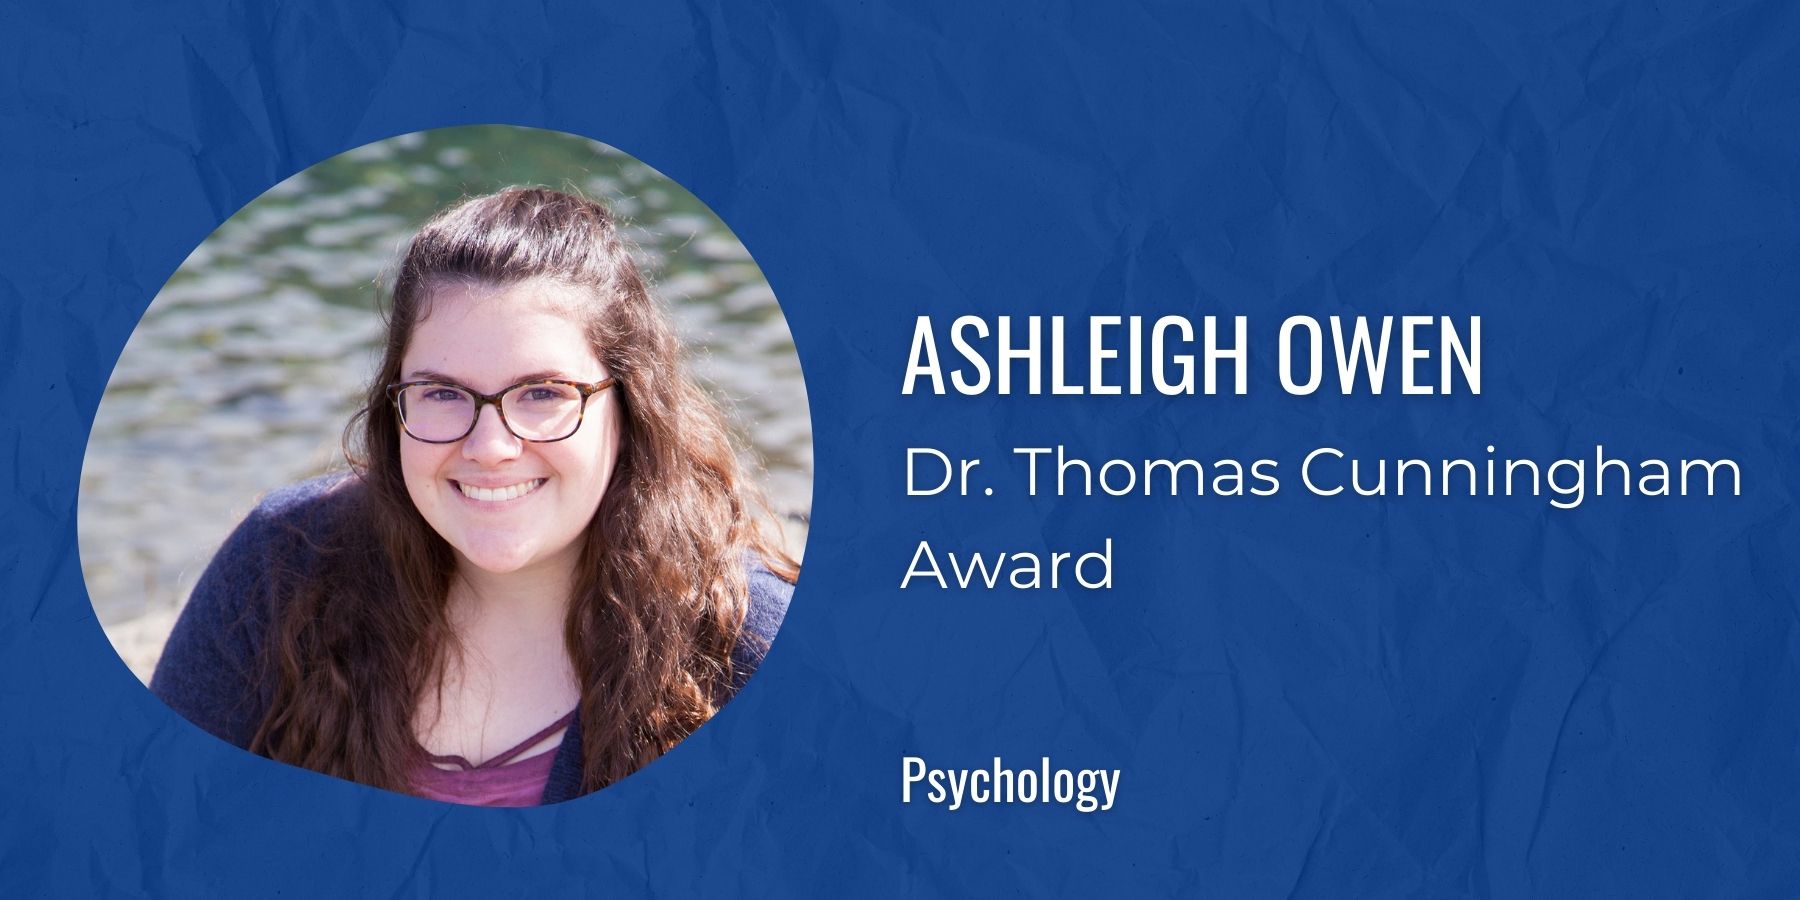 Image of Ashleigh Owen with text: Dr. Thomas Cunningham award, Psychology
